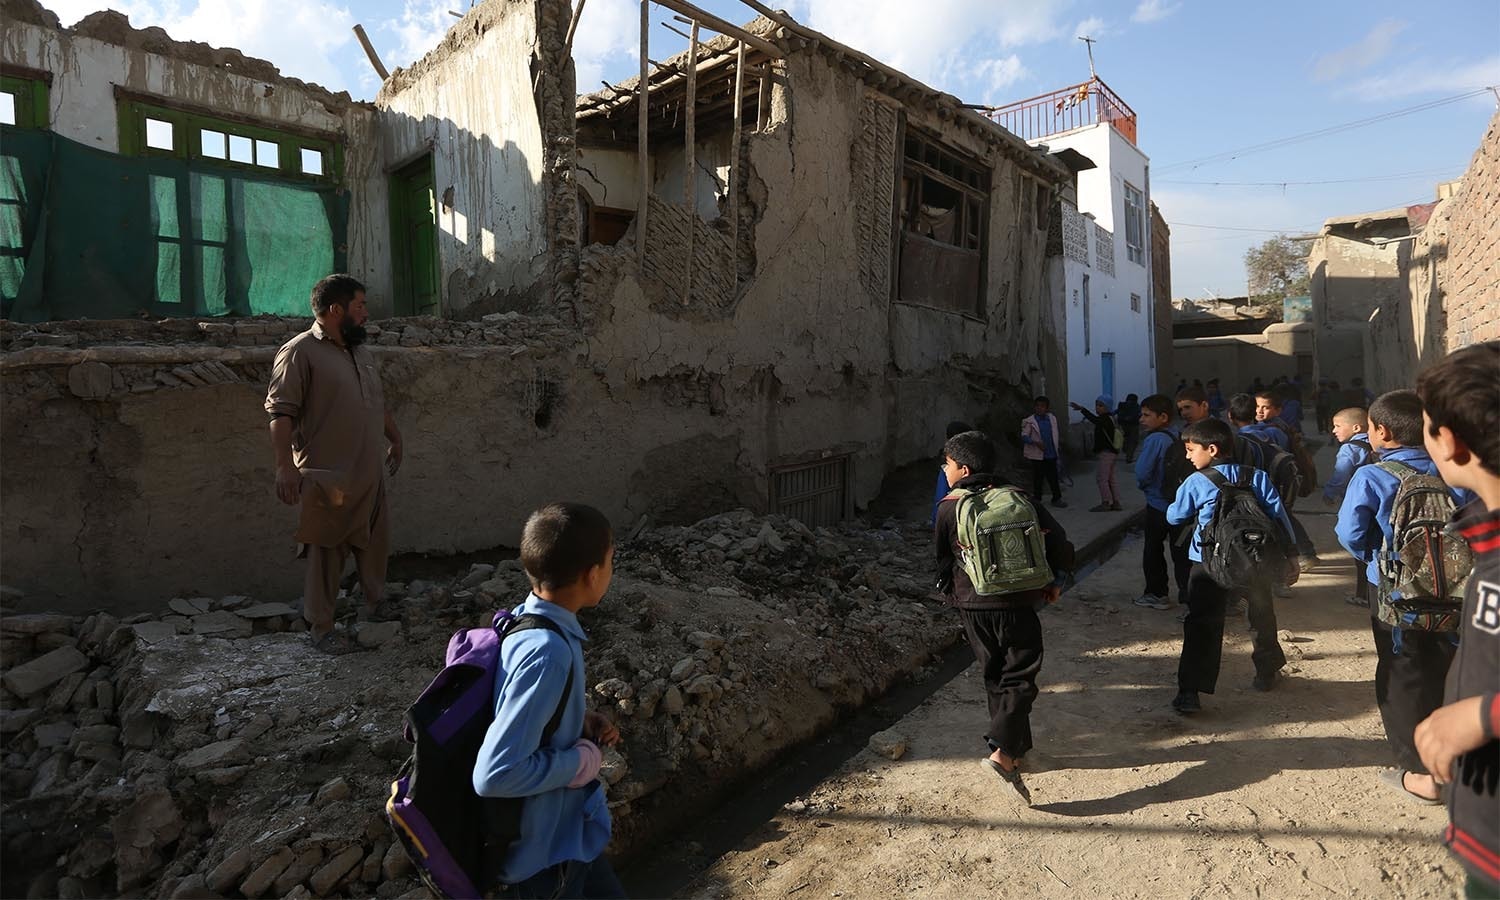 Afghan school boys walk to look a damaged house following a powerful earthquake that could be felt across South Asia, in Kabul, Afghanistan, Monday, Oct. 26, 2015. In Afghanistan's Takhar province, west of Badakhshan, at least 12 students at a girls' school were killed in a stampede as they tried to get out of the shaking buildings, a local official says. Sonatullah Taimor, the spokesman for the Takhar provincial governor, says another 30 girls have been taken to the hospital in the provincial capital of Taluqan. (AP Photo/Rahmat Gul)